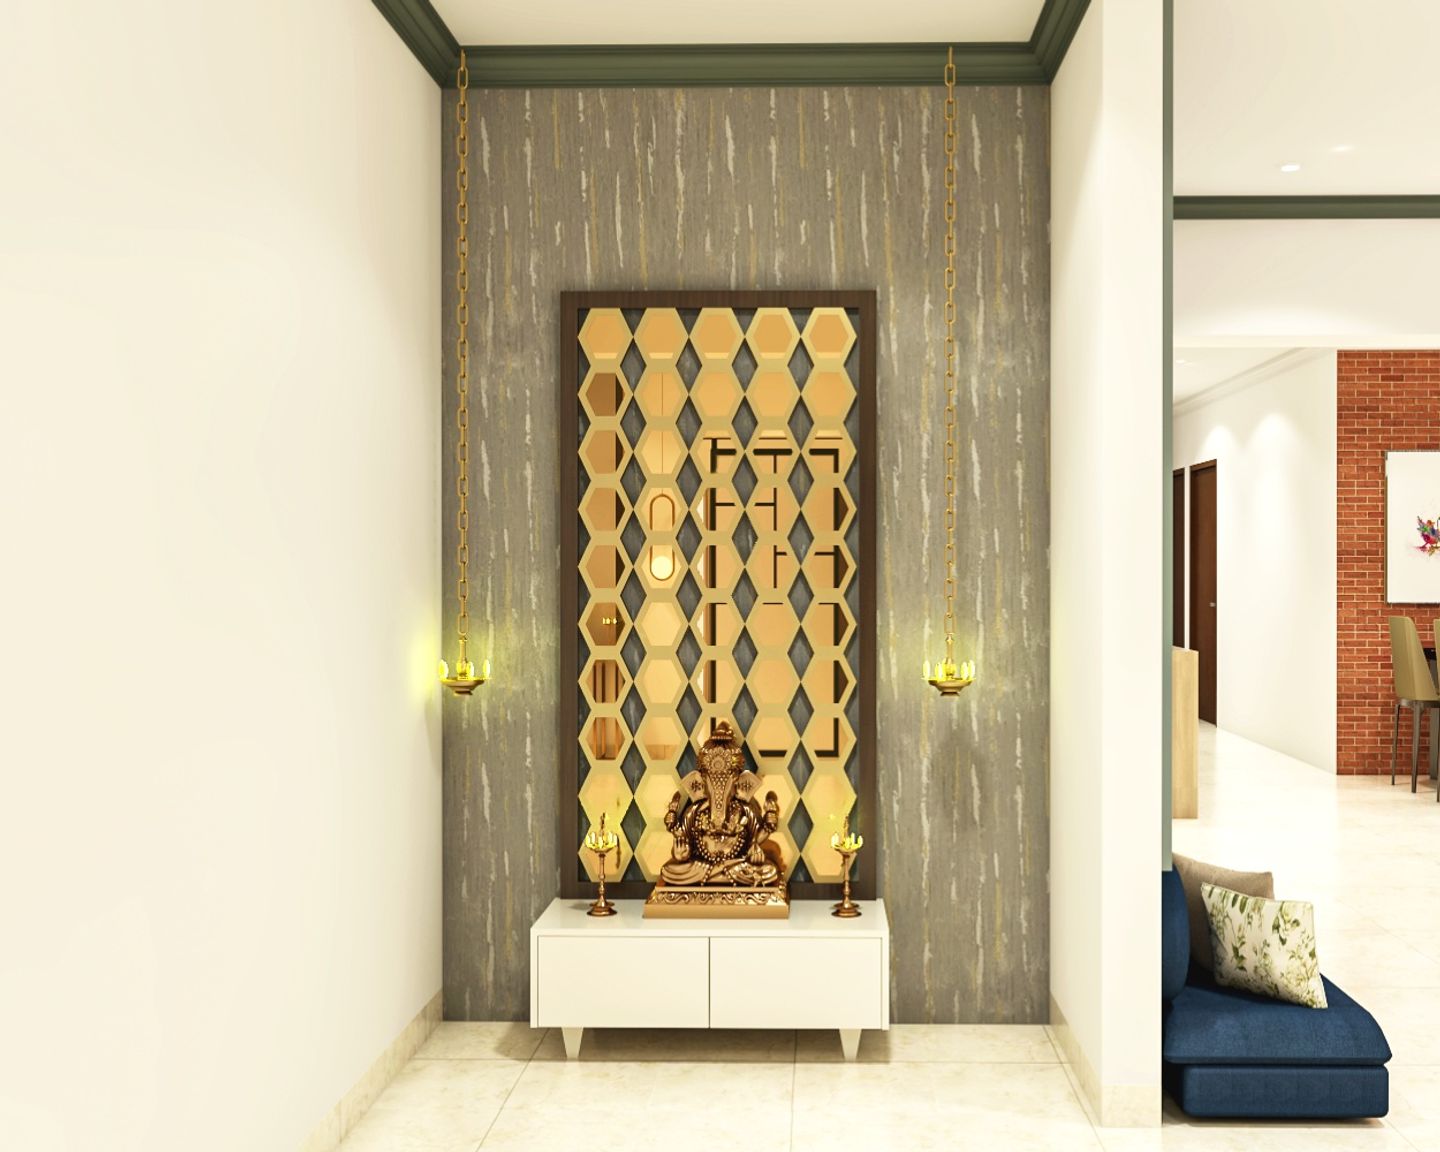 2x1x7 Ft Floor-Mounted Frosty White Mandir Unit With Hexagonal Mirrored Wall - Livspace